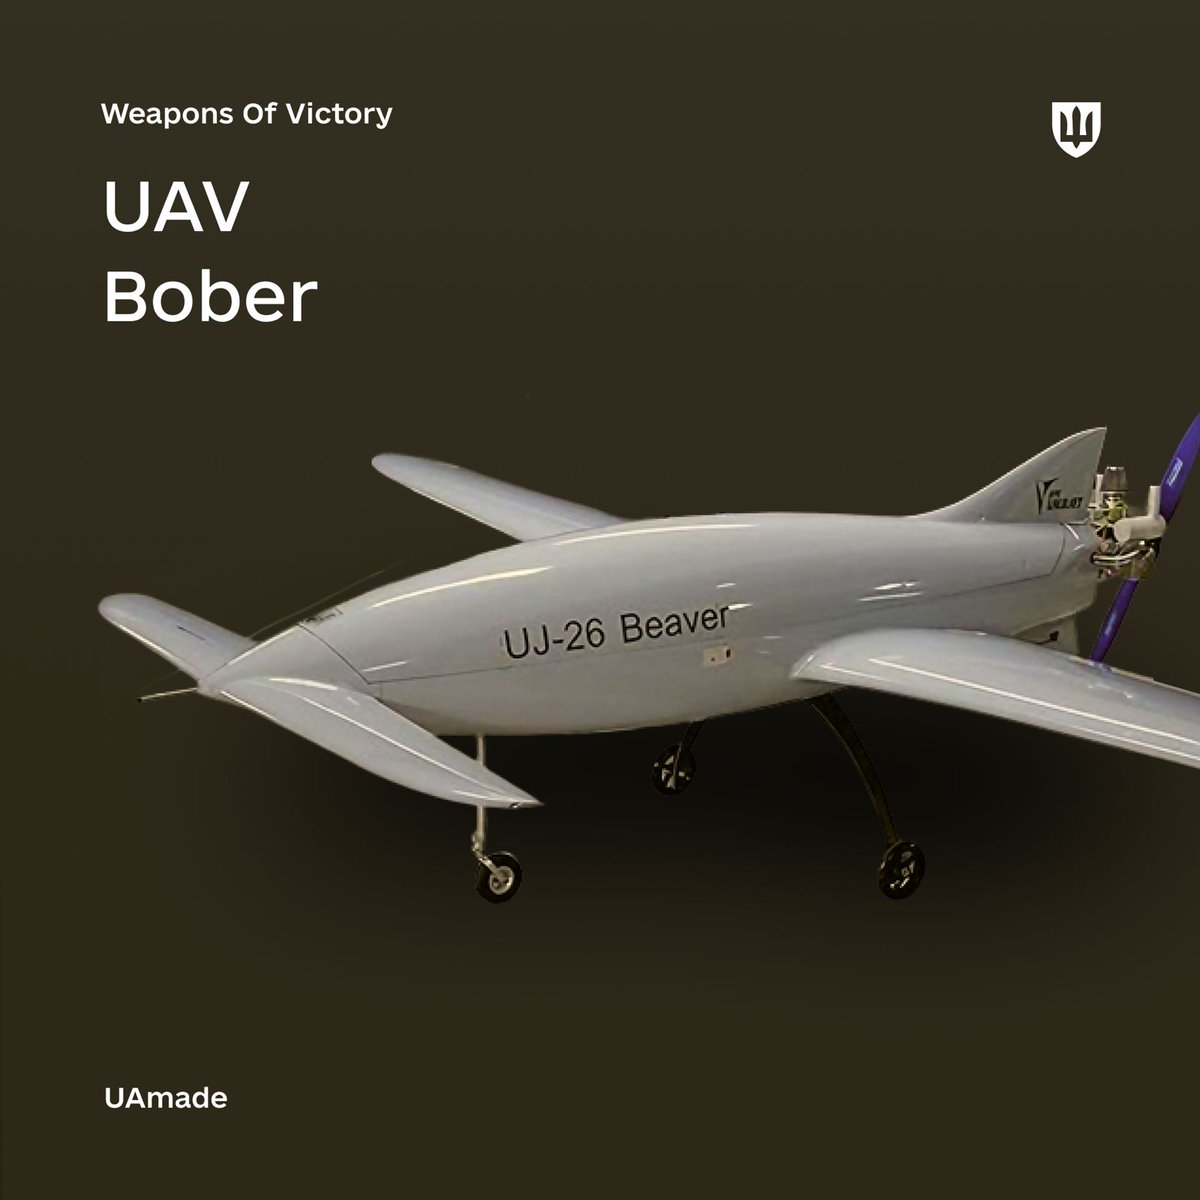 The UJ-26 Bober (Beaver) UAV is a long-range loitering munition. In 2023, the @DI_Ukraine mentioned this attack drone as part of the Black Box project launched jointly with @BackAndAlive. Bober has a range of up to 800 km. #WeaponsOfVictory #MadeInUkraine